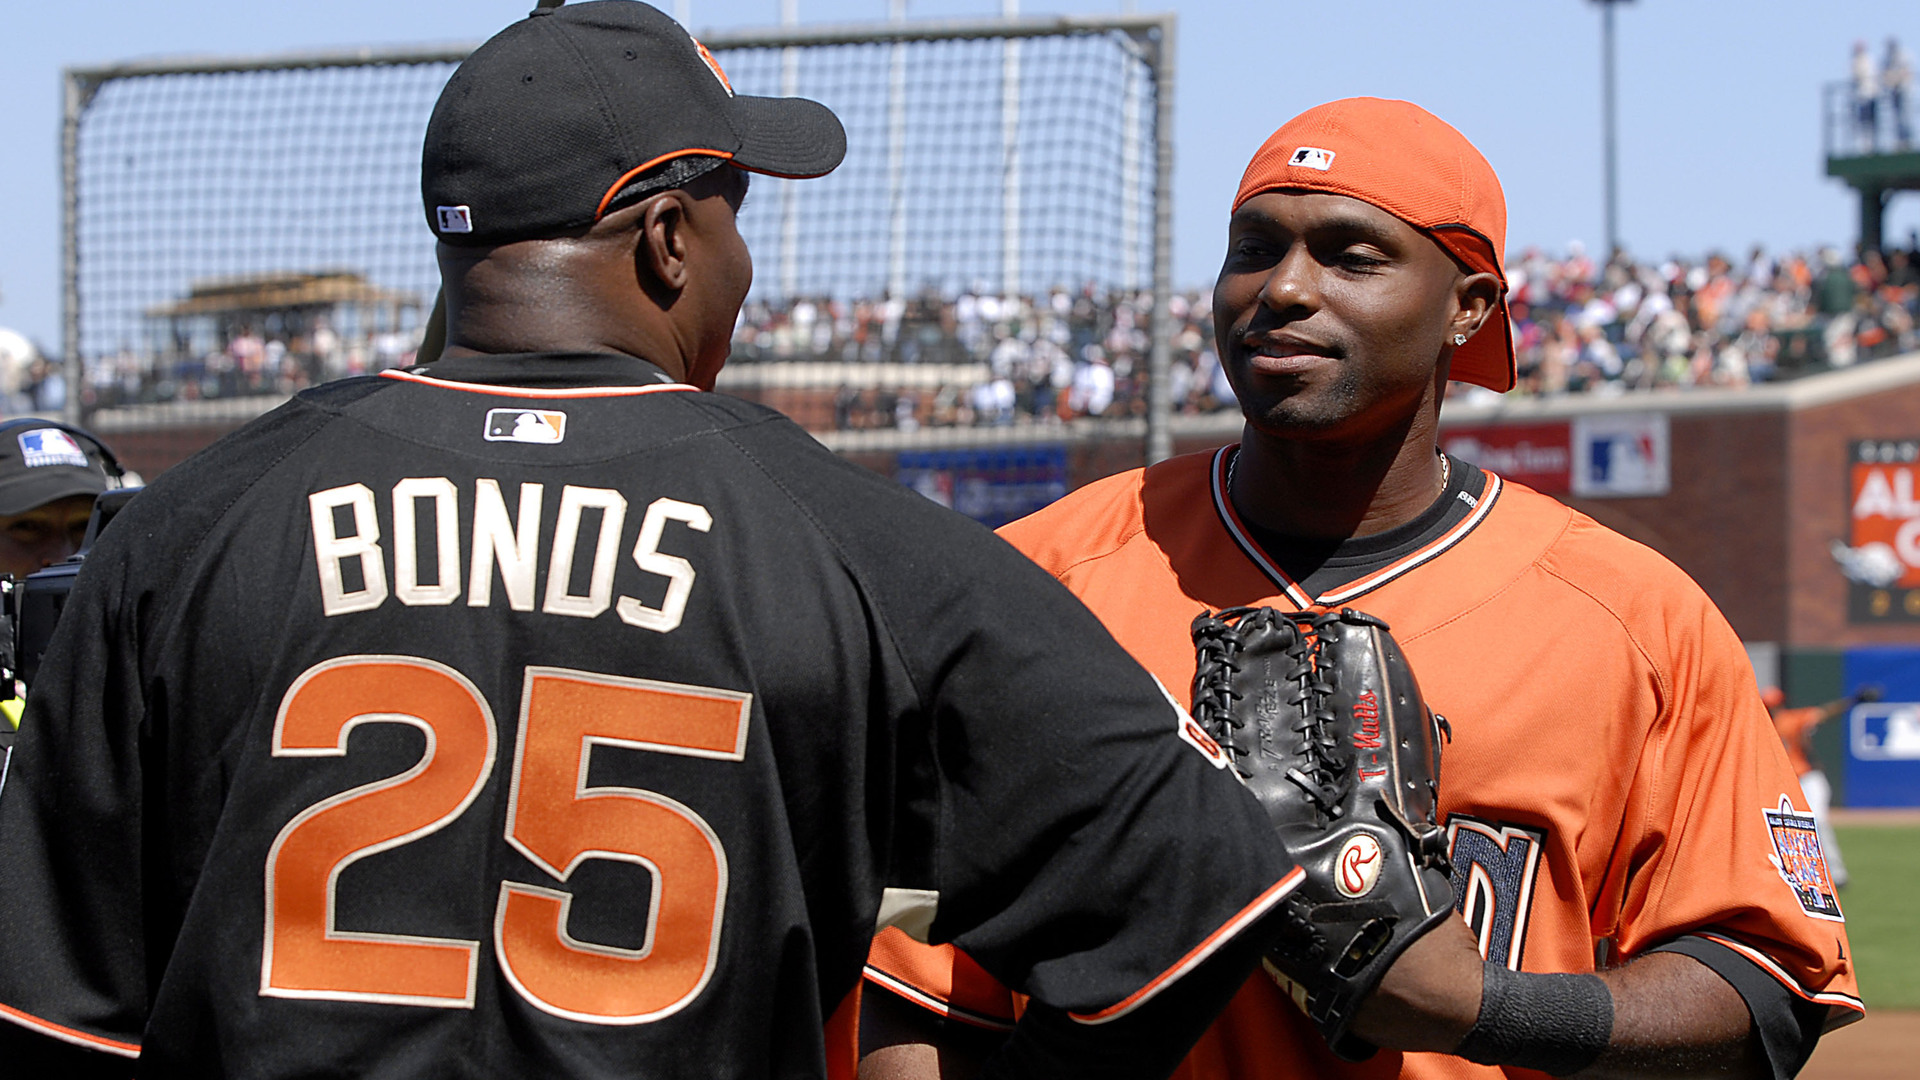 Giants OF Joc Pederson talked to Barry Bonds before three-HR game